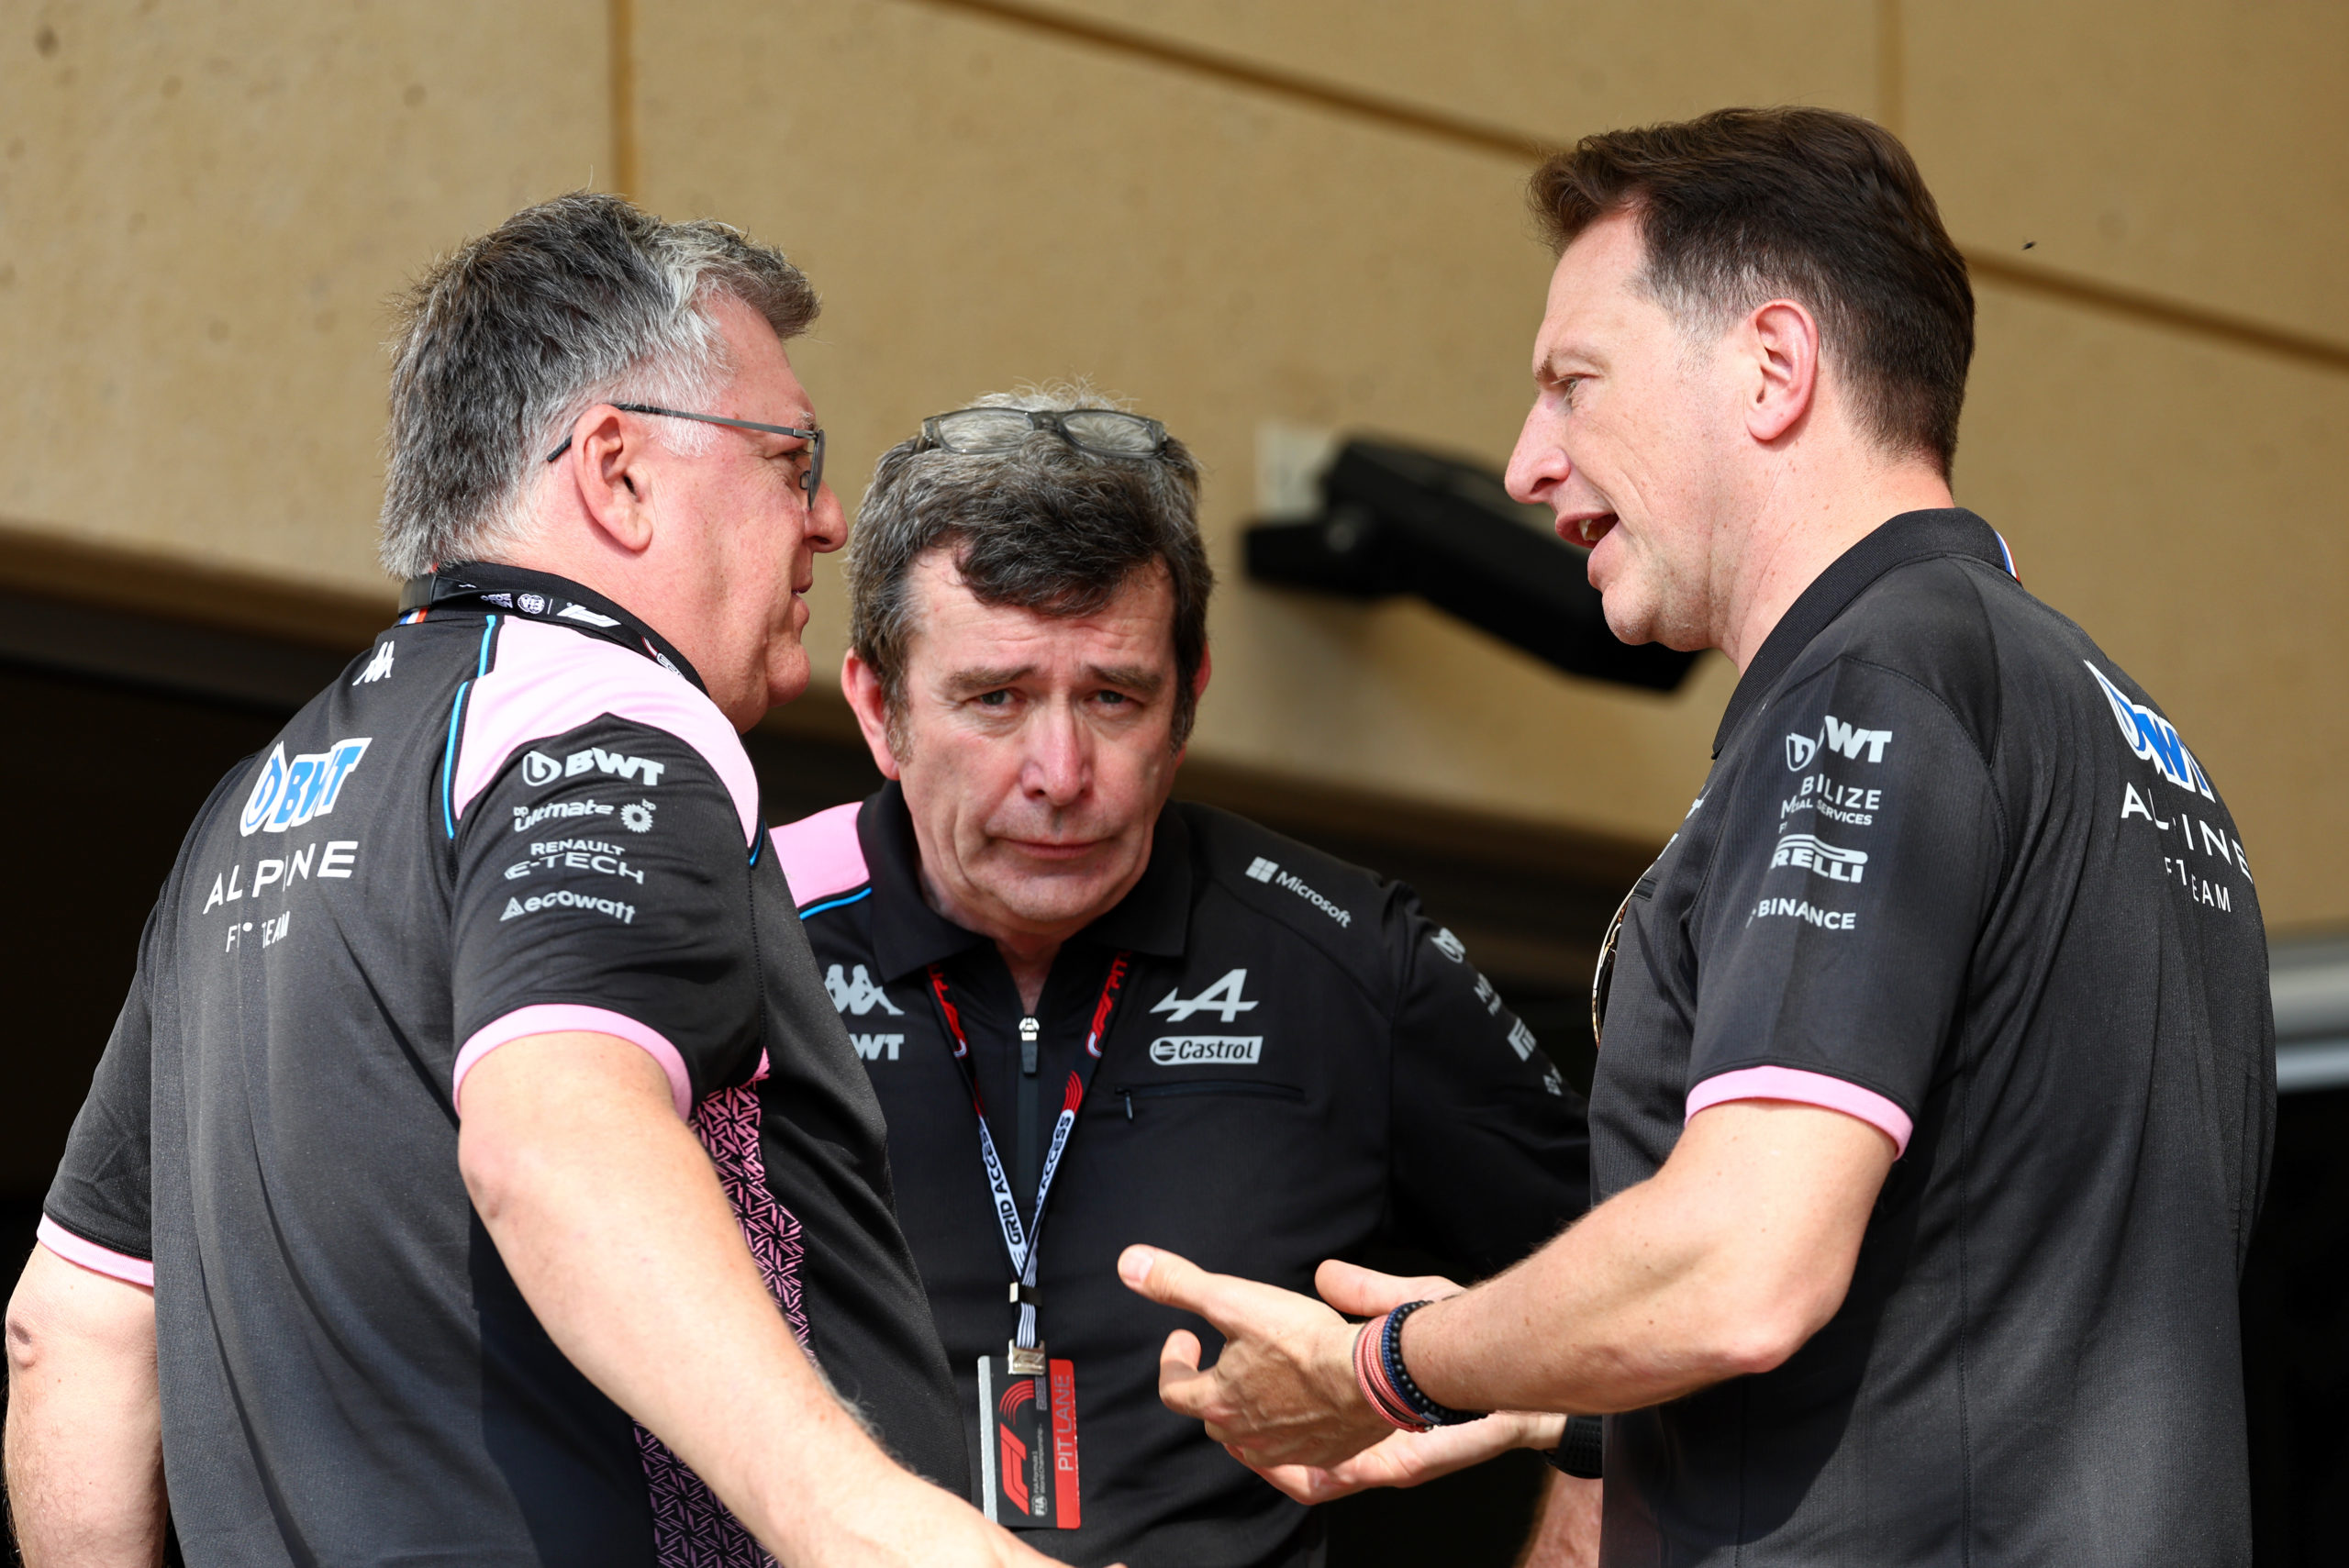 gary anderson: lessons from my own ‘alpine vs  otmar’ f1 moment